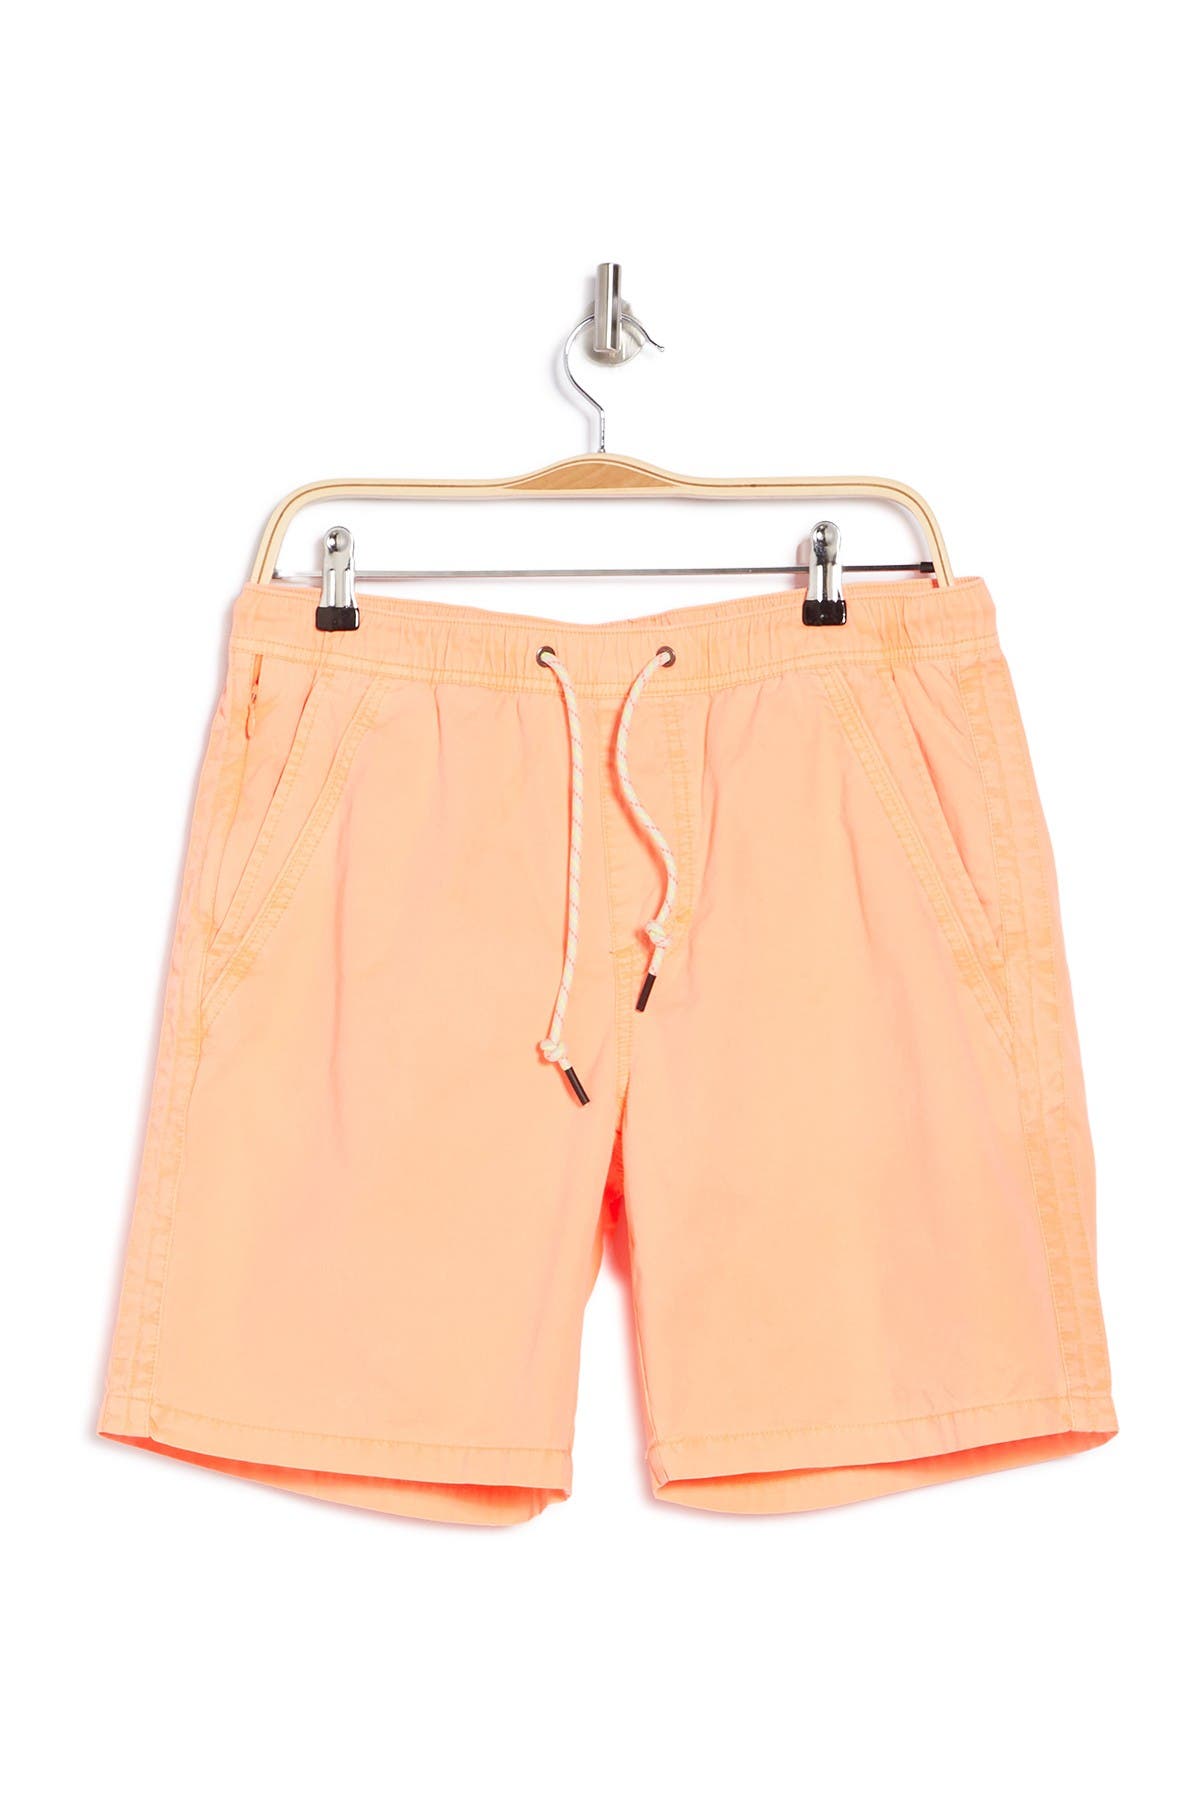 Union Denim Sun-sational Pull-on Woven Shorts In Neon Guava